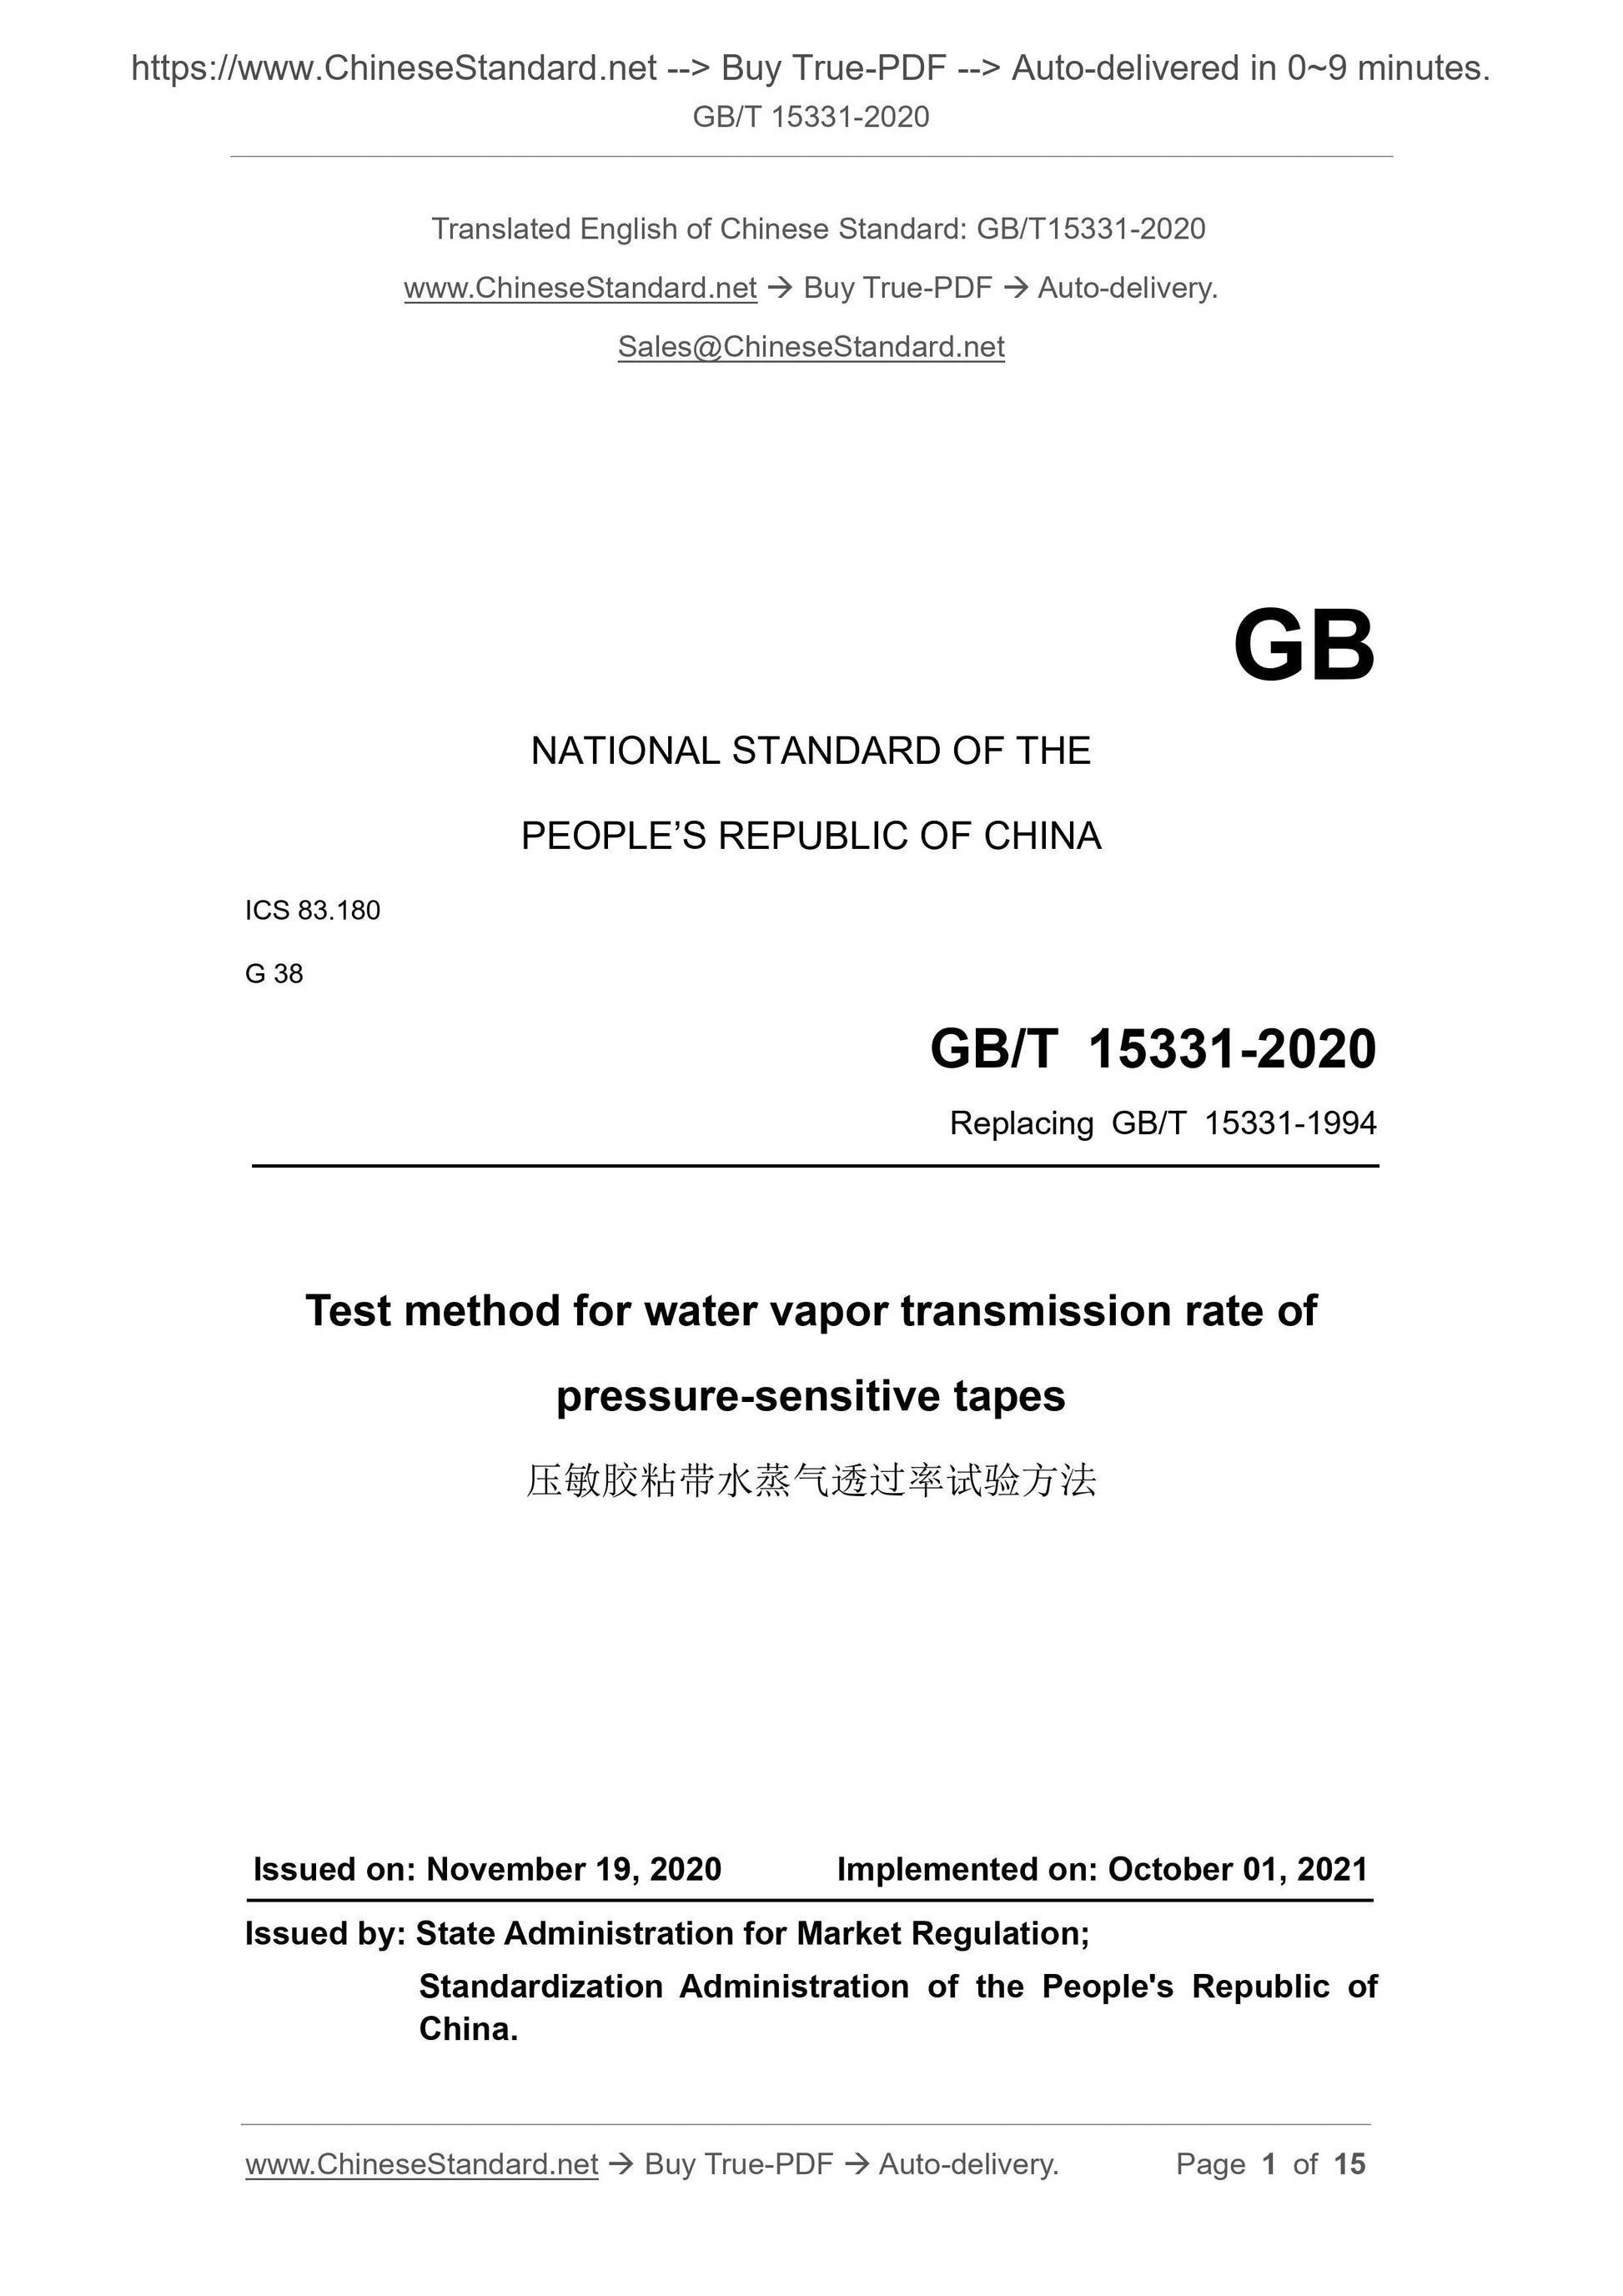 GB/T 15331-2020 Page 1